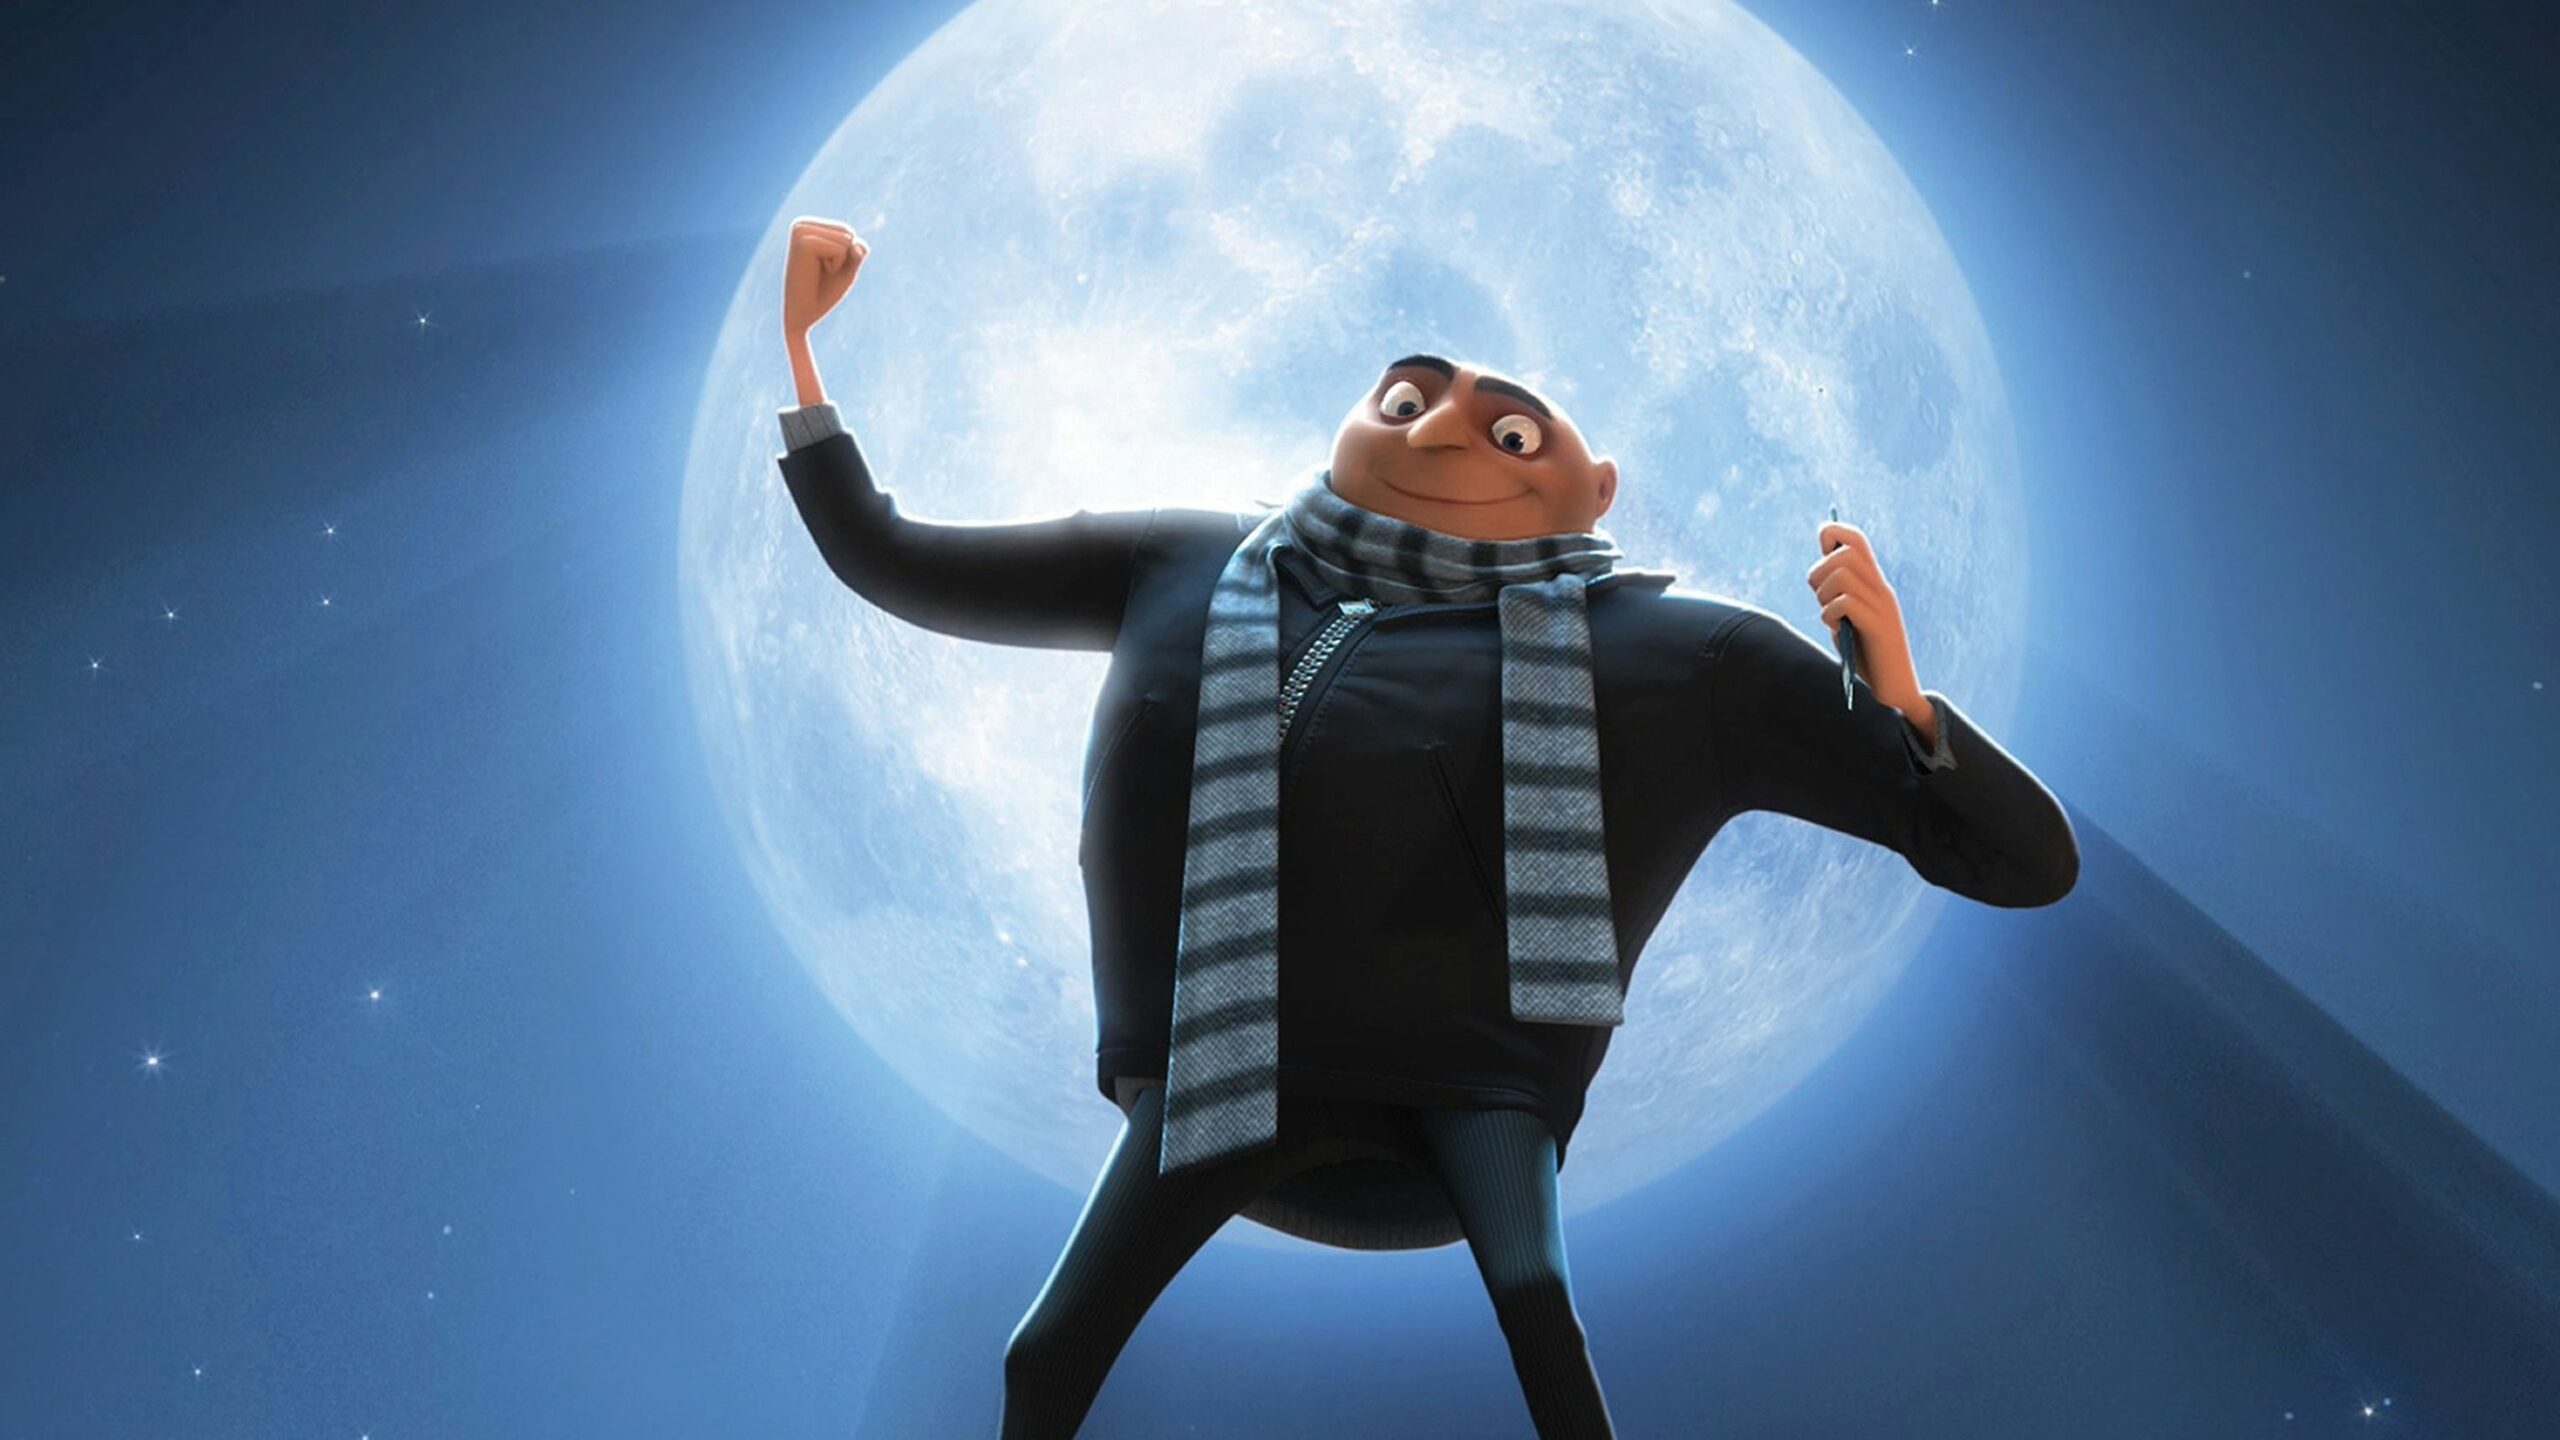 Best Animated Movies Like Despicable Me